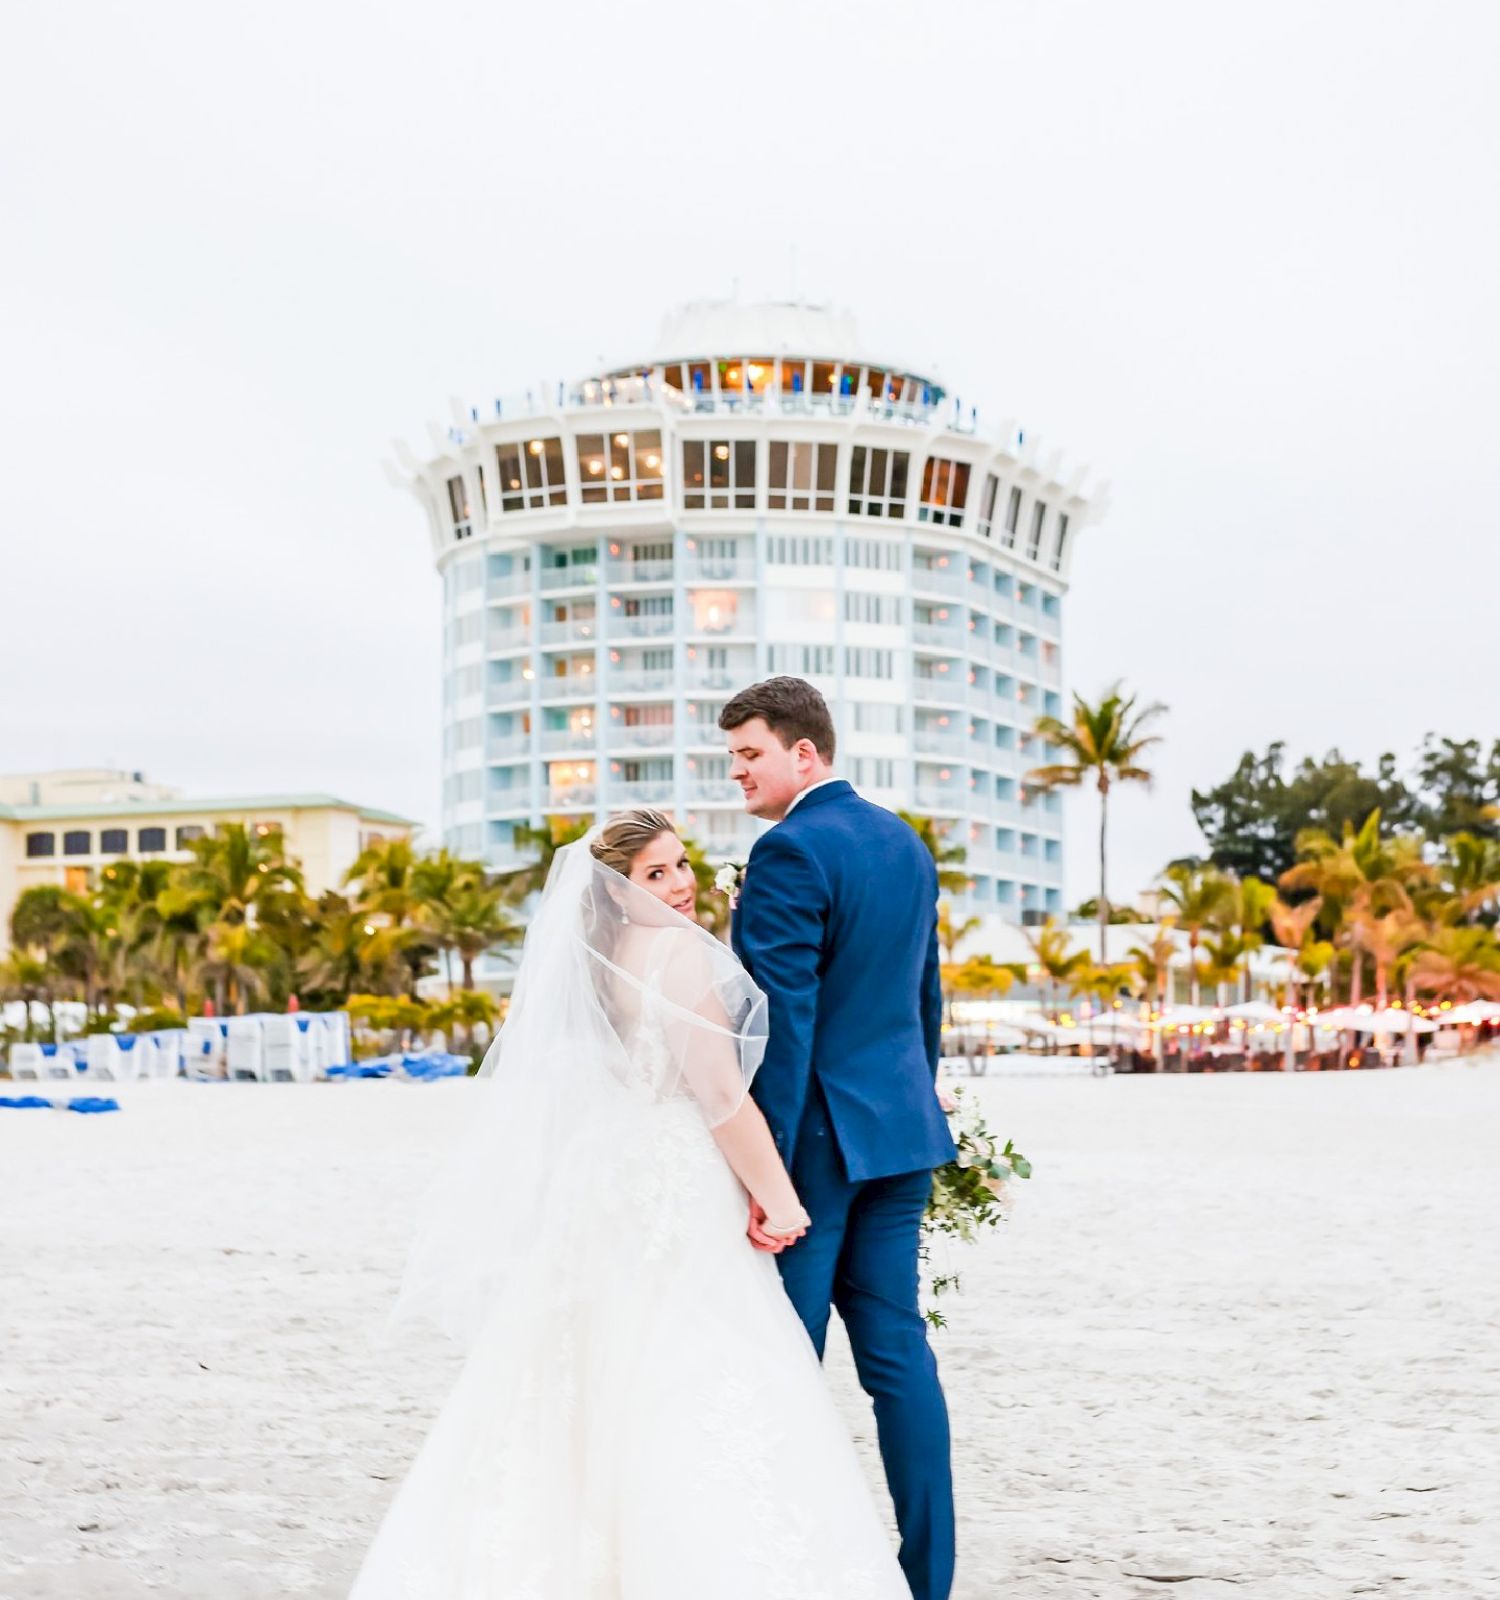 A couple in wedding attire stands on a beach with a tall, round building and palm trees in the background, embracing each other.